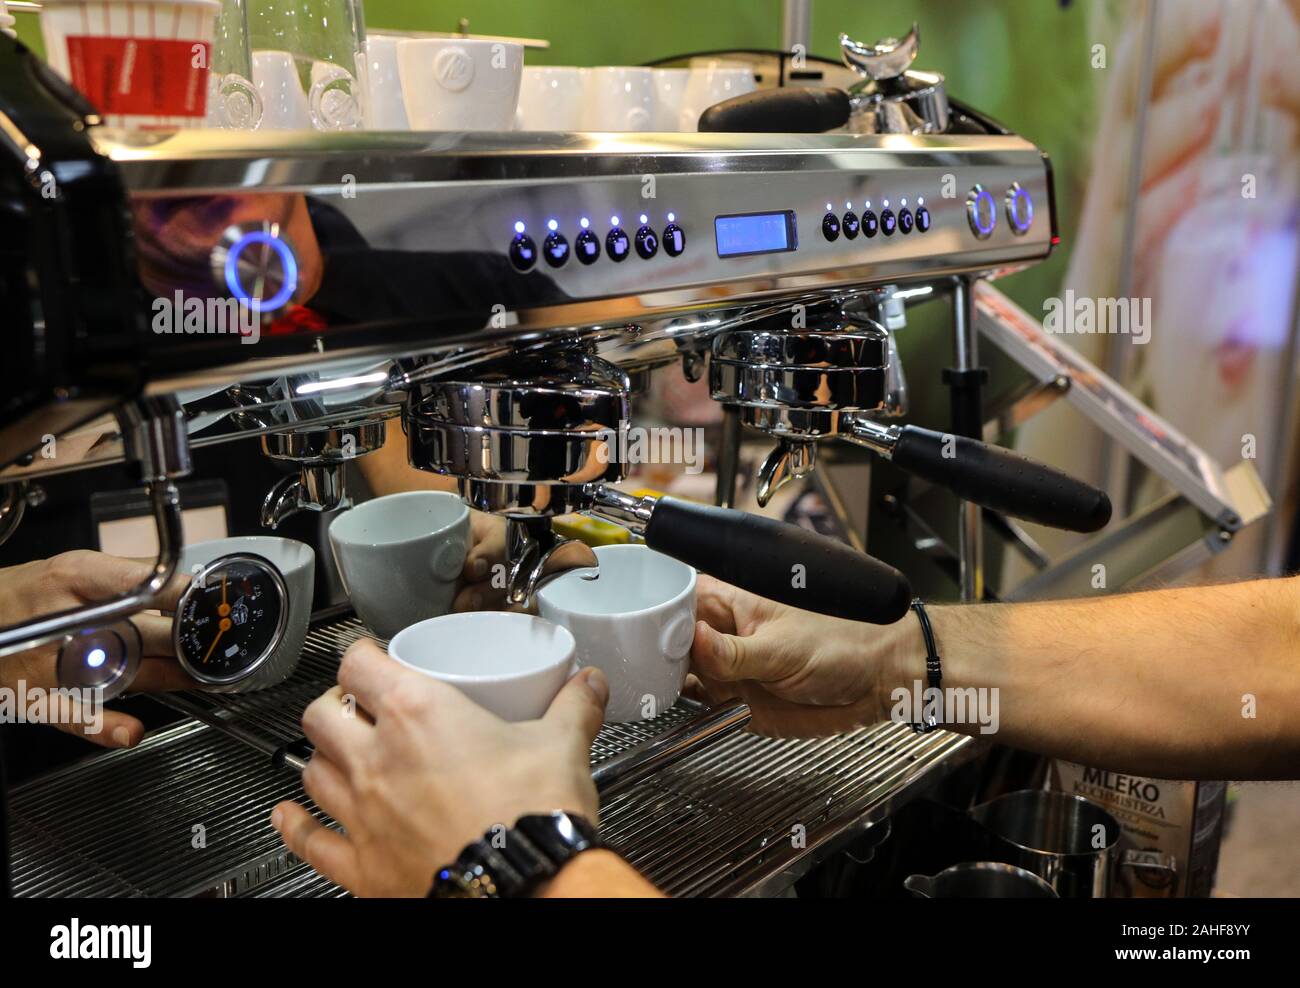 Cracow, Poland - November 20, 2019: Barista making coffee at coffee machine  at Gastrofood - Trade Fair for Food and Drinks for Catering in Cracow. Po  Stock Photo - Alamy